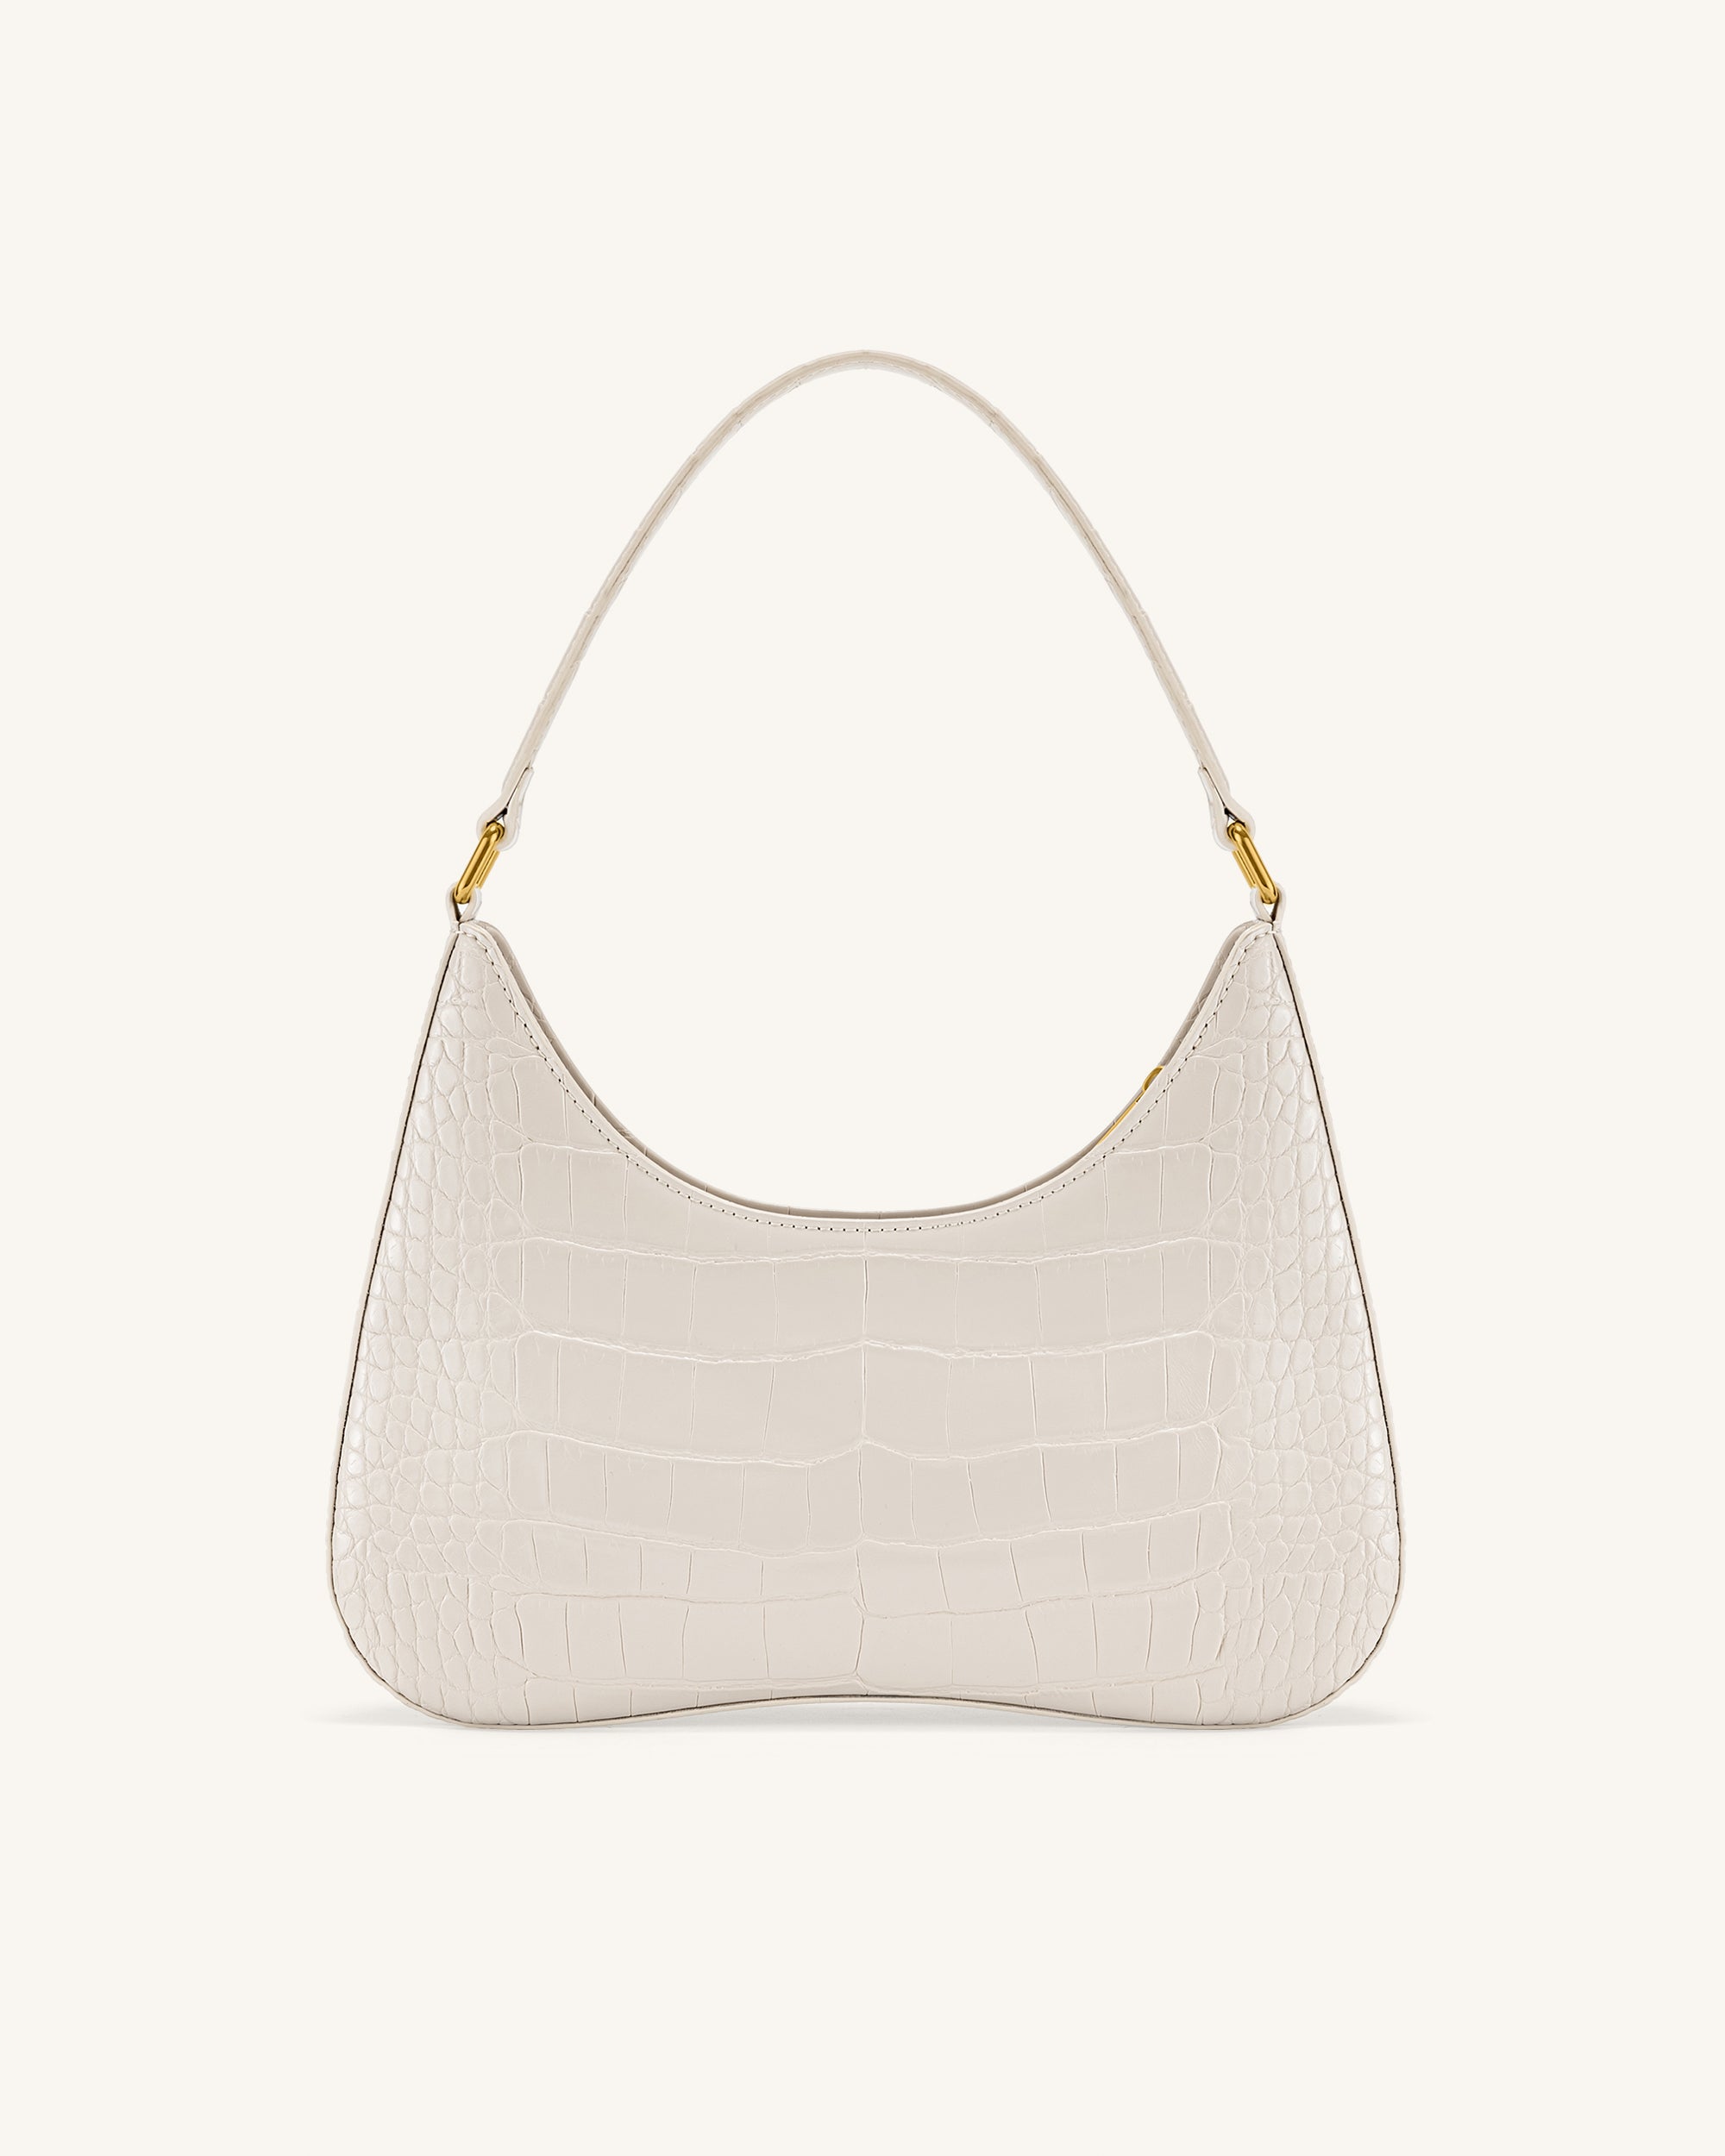 Are WHITE BAGS Back In Style?